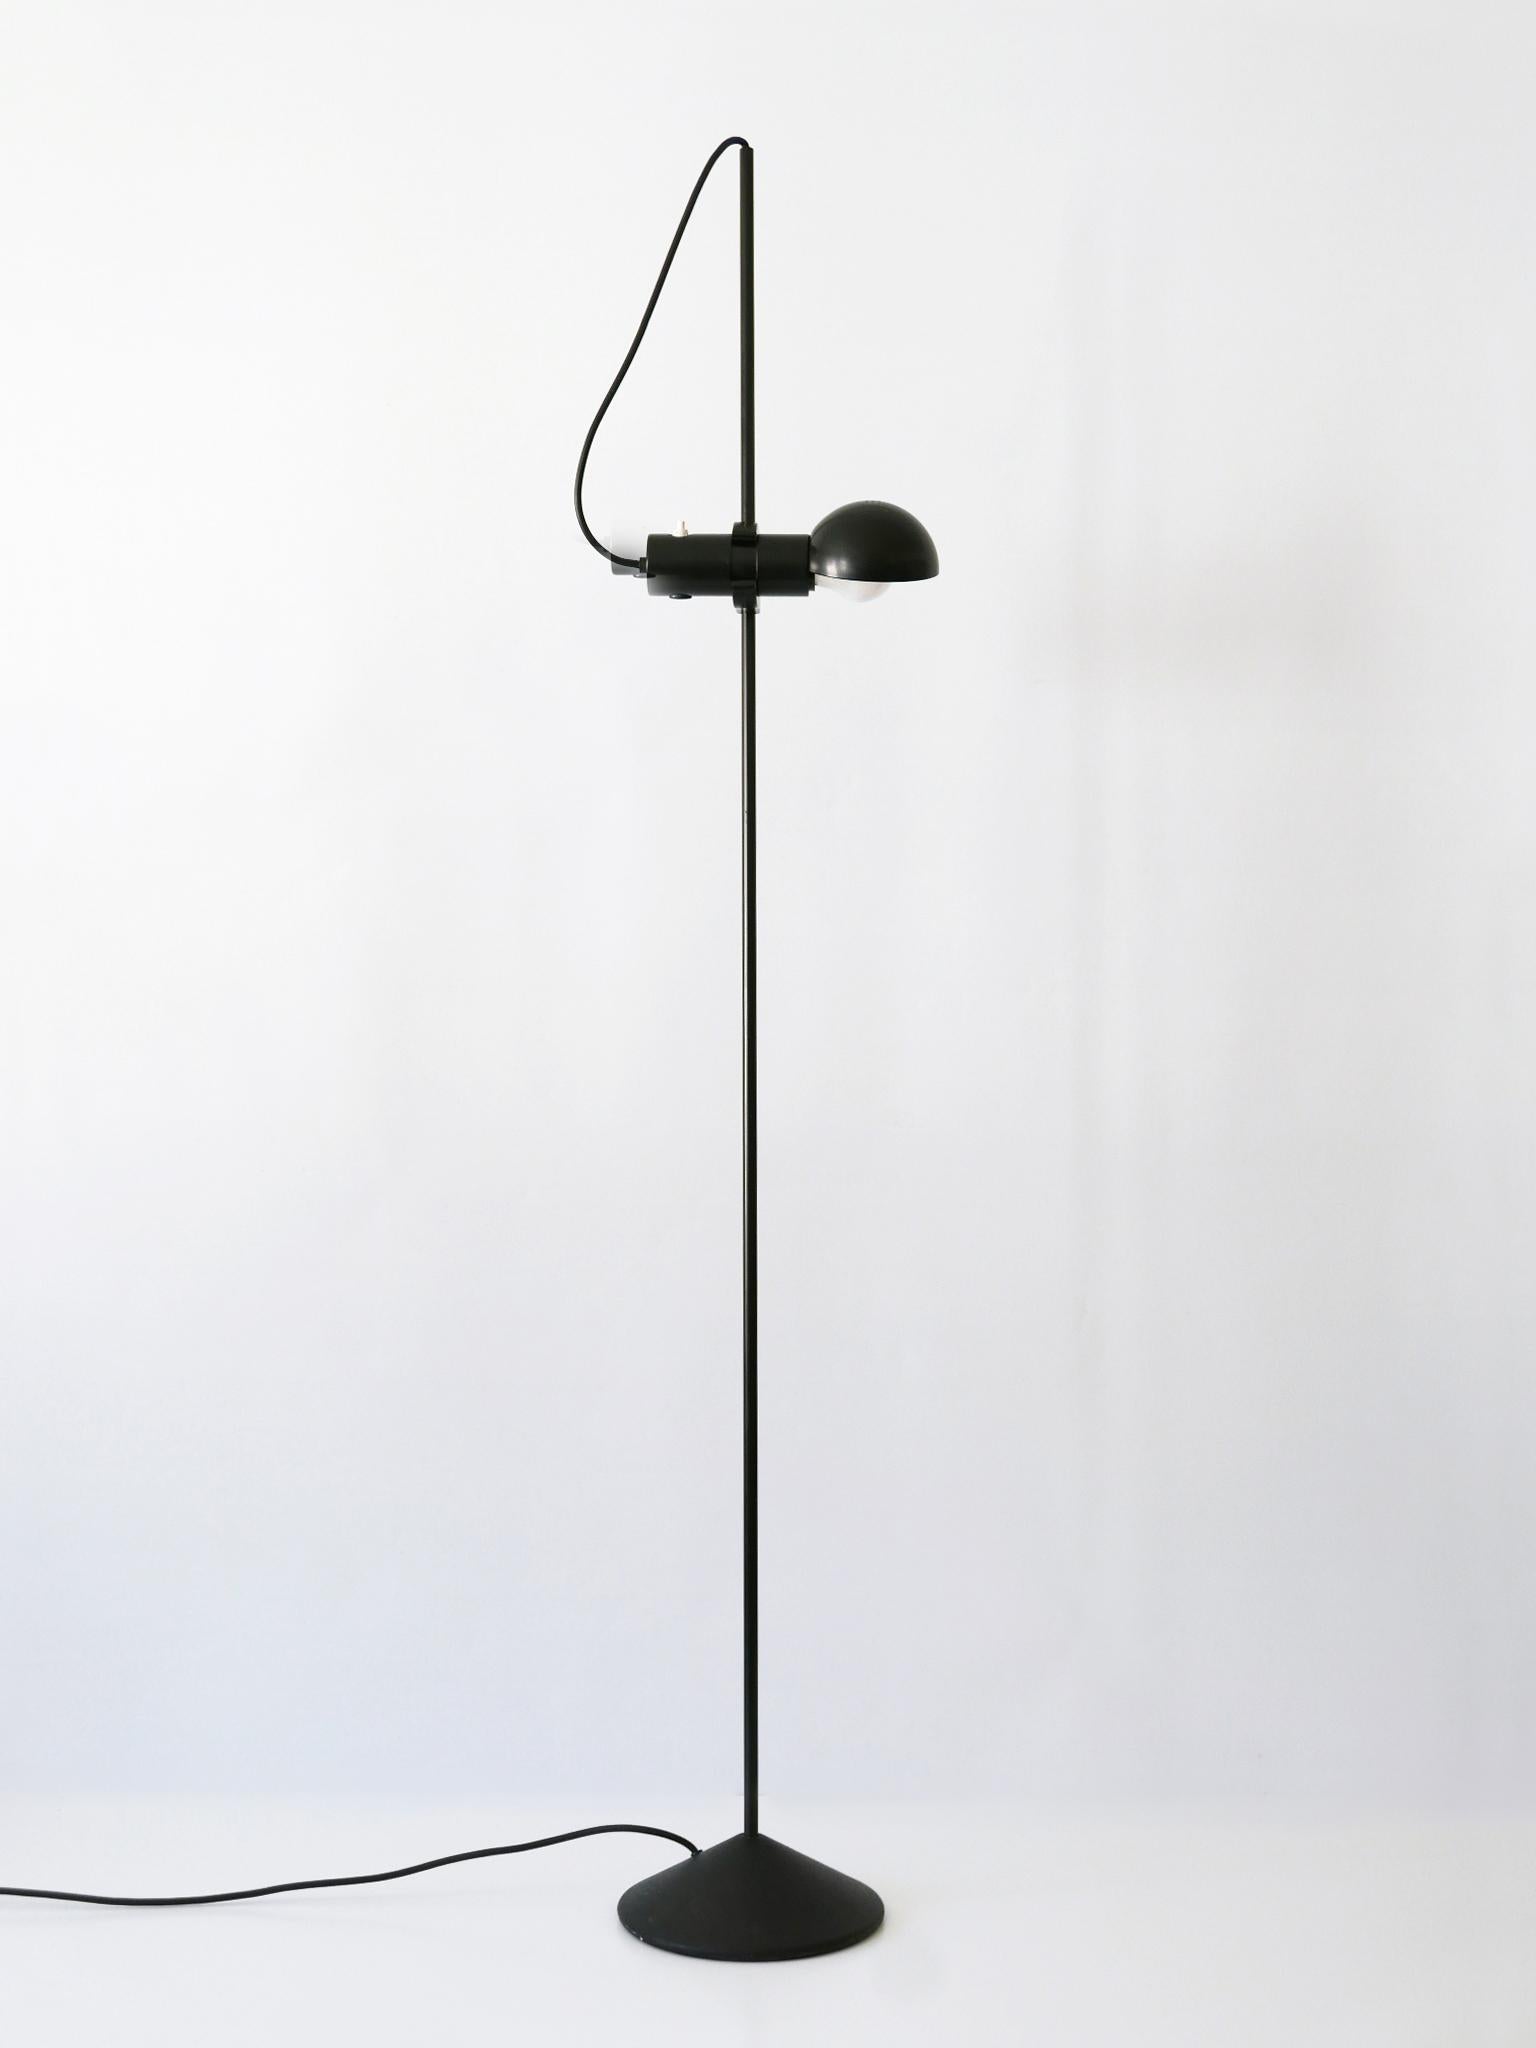 Rare Floor Lamp or Reading Light by Barbieri e Marianelli for Tronconi 1970s For Sale 5